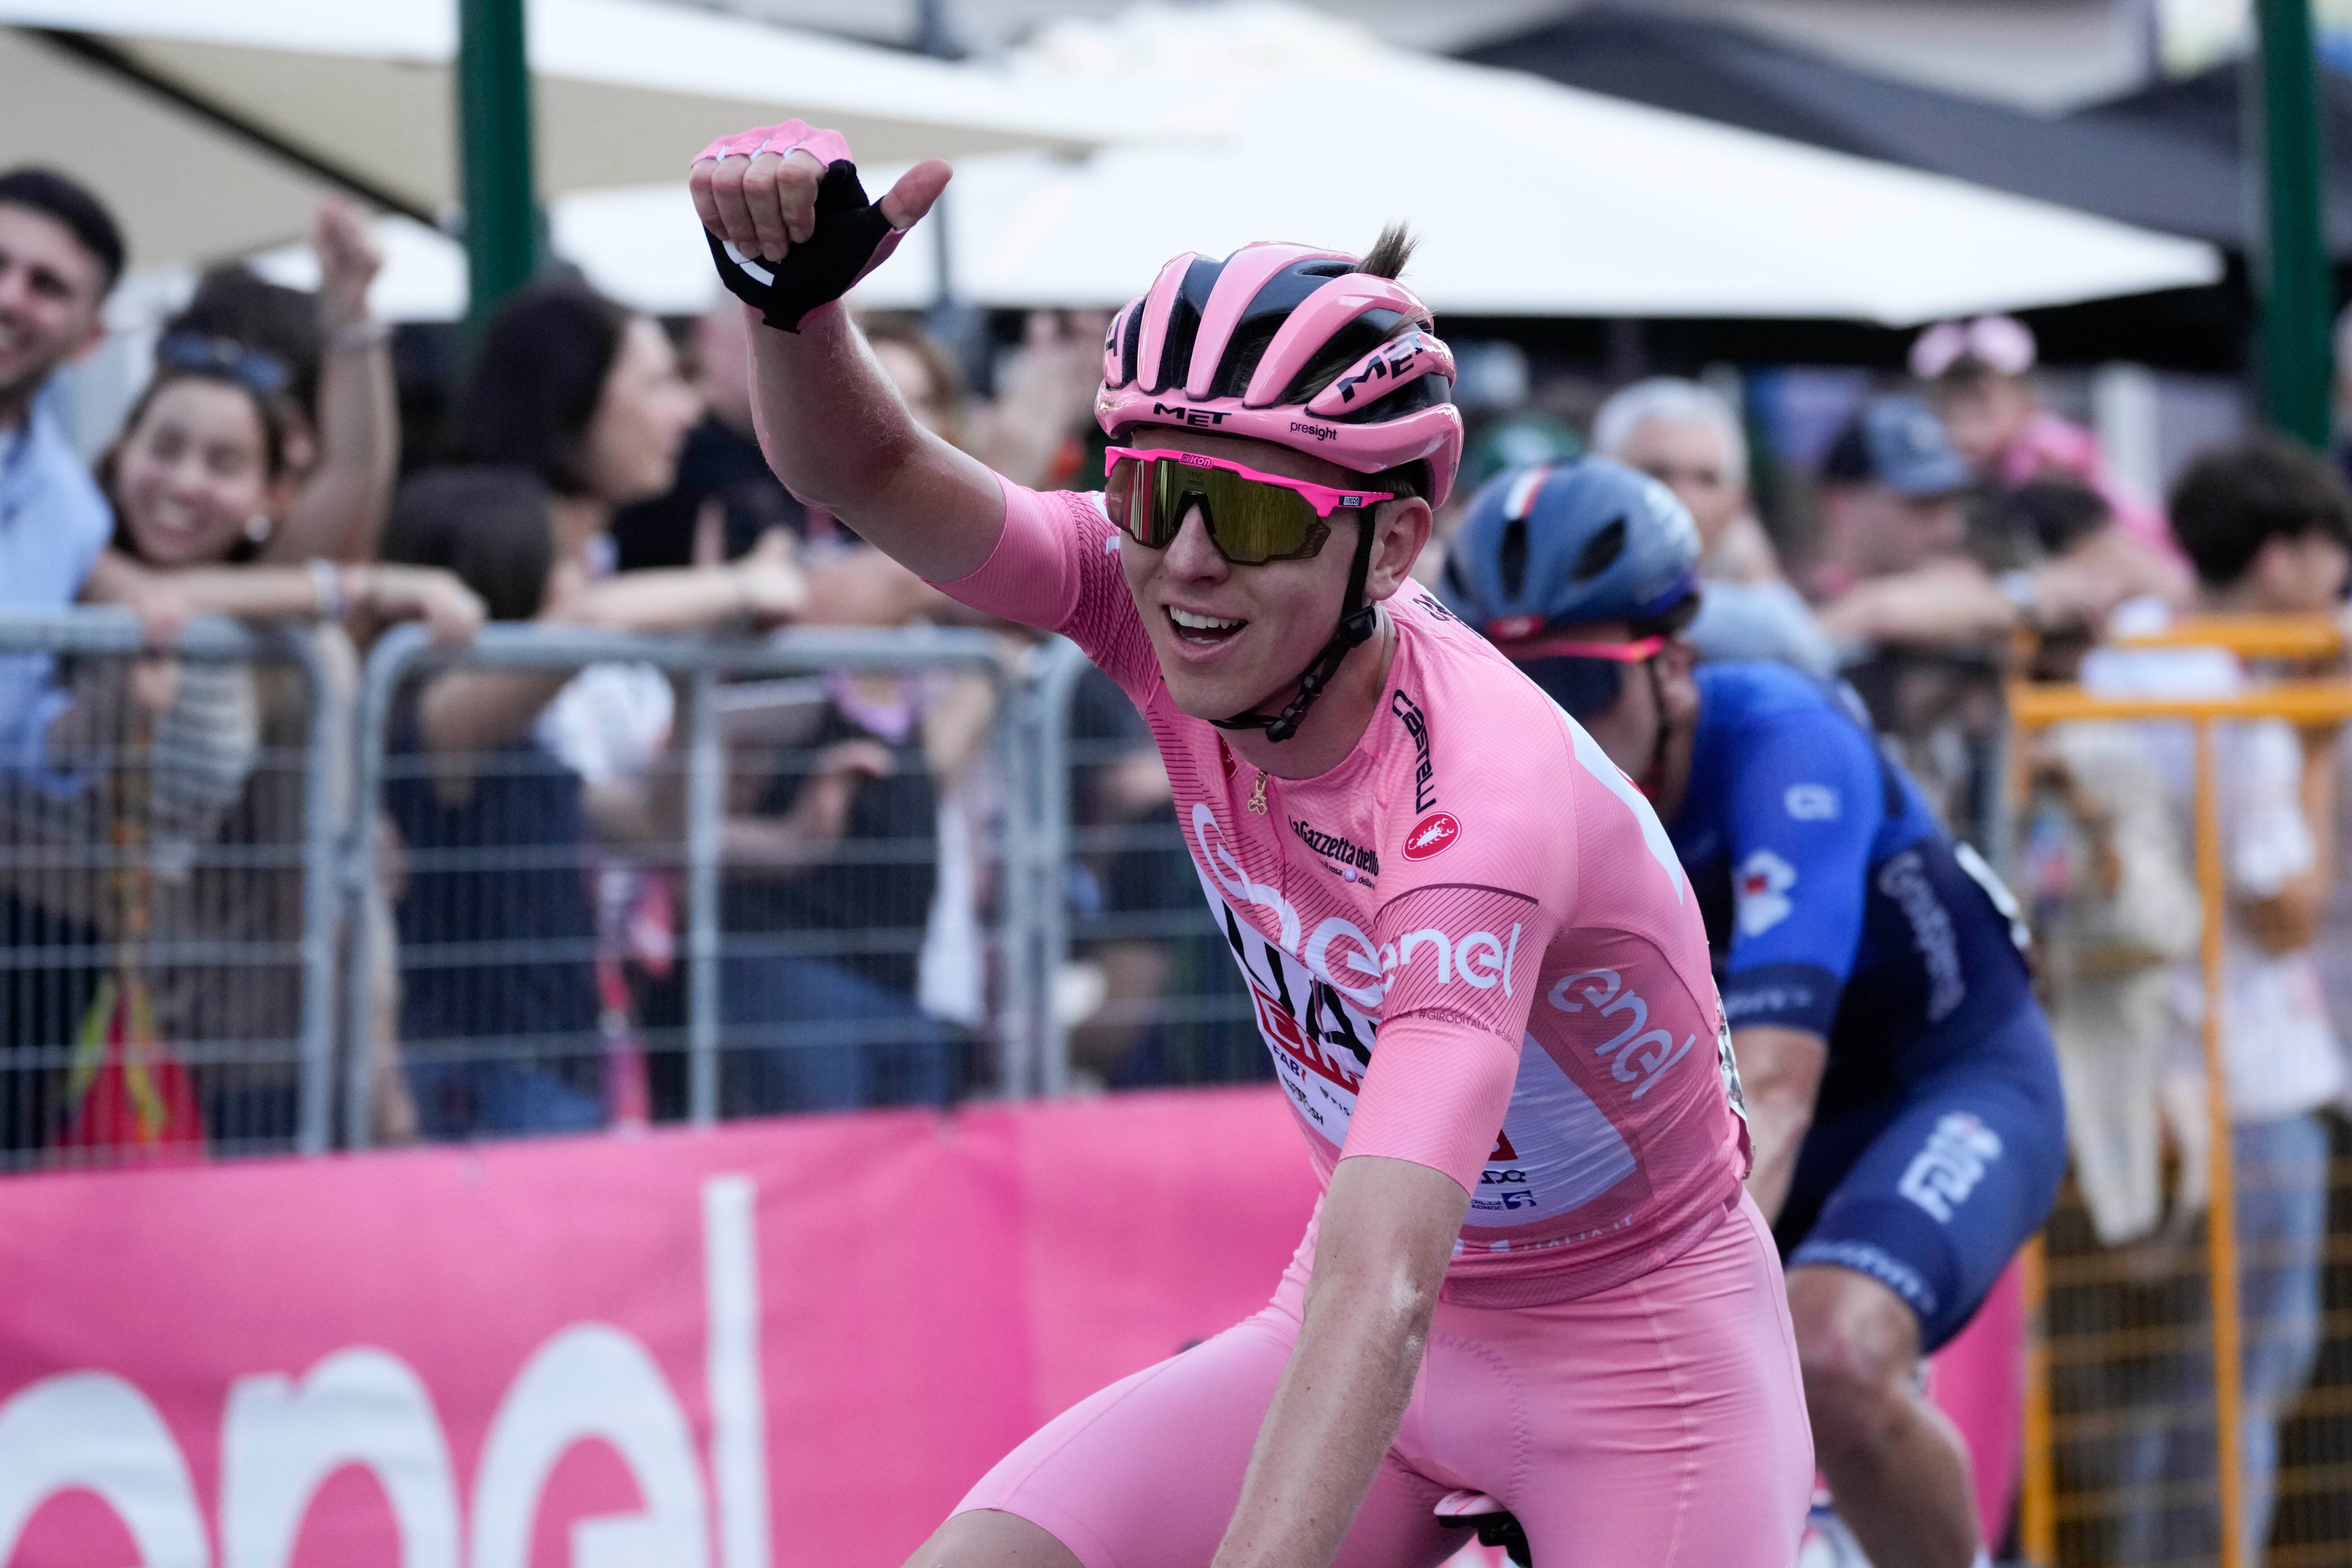 Tadej Pogacar triumphed in style at the Giro